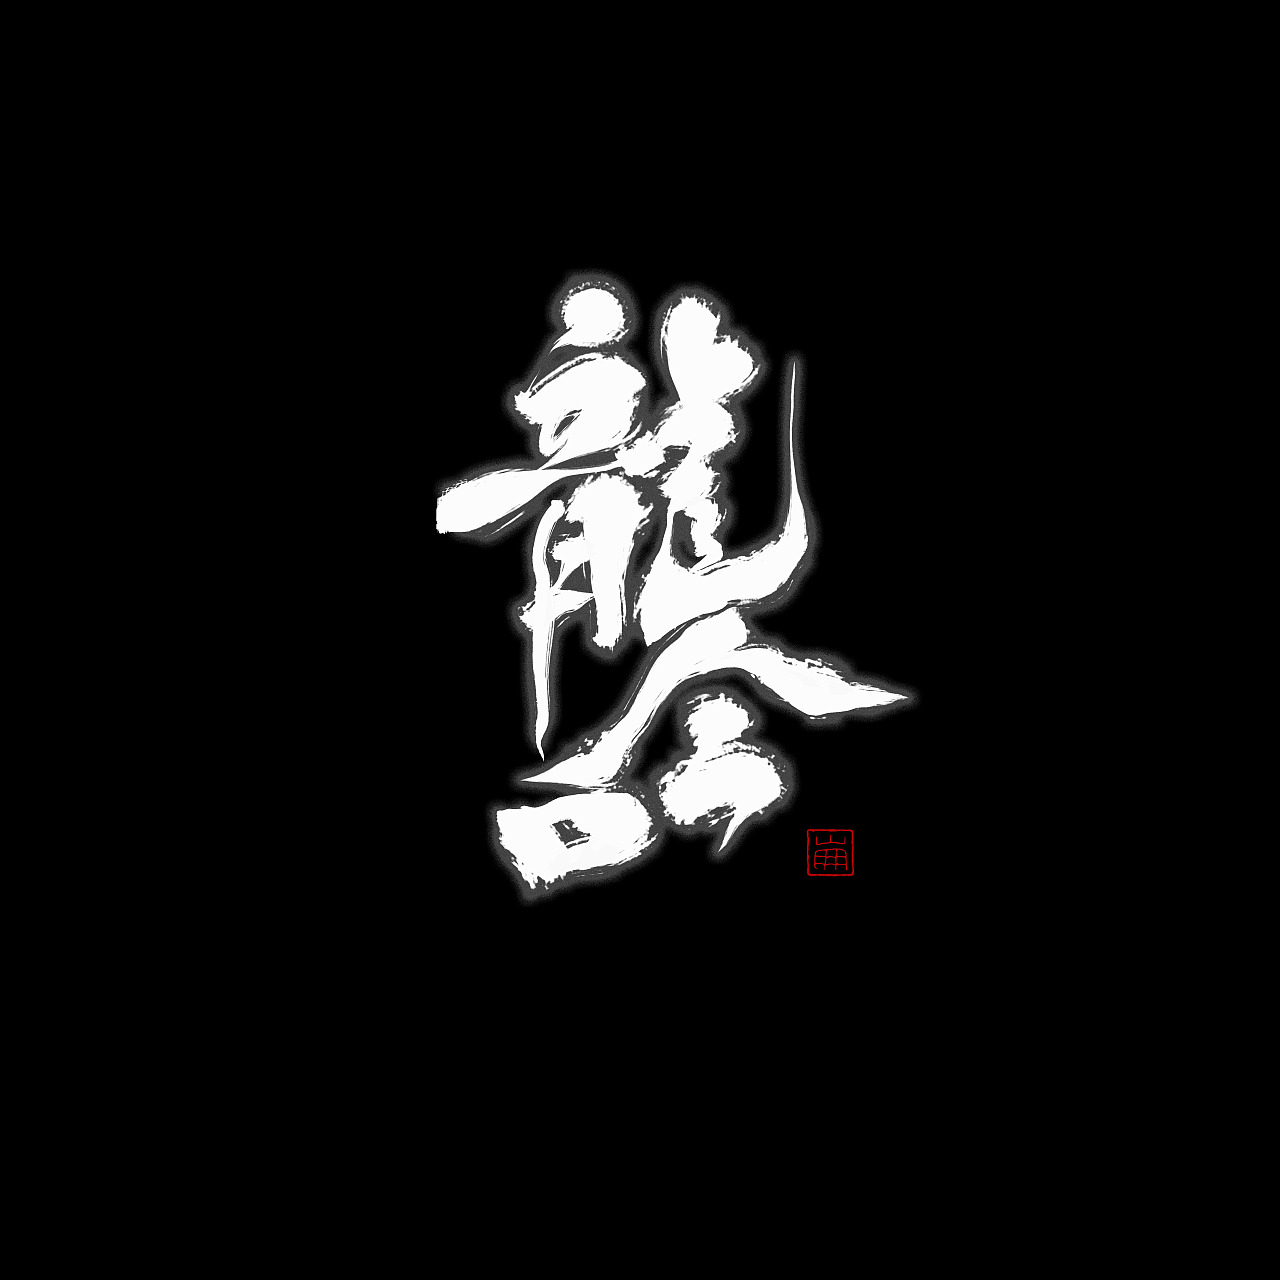 8P Chinese traditional calligraphy brush calligraphy font style appreciation #148